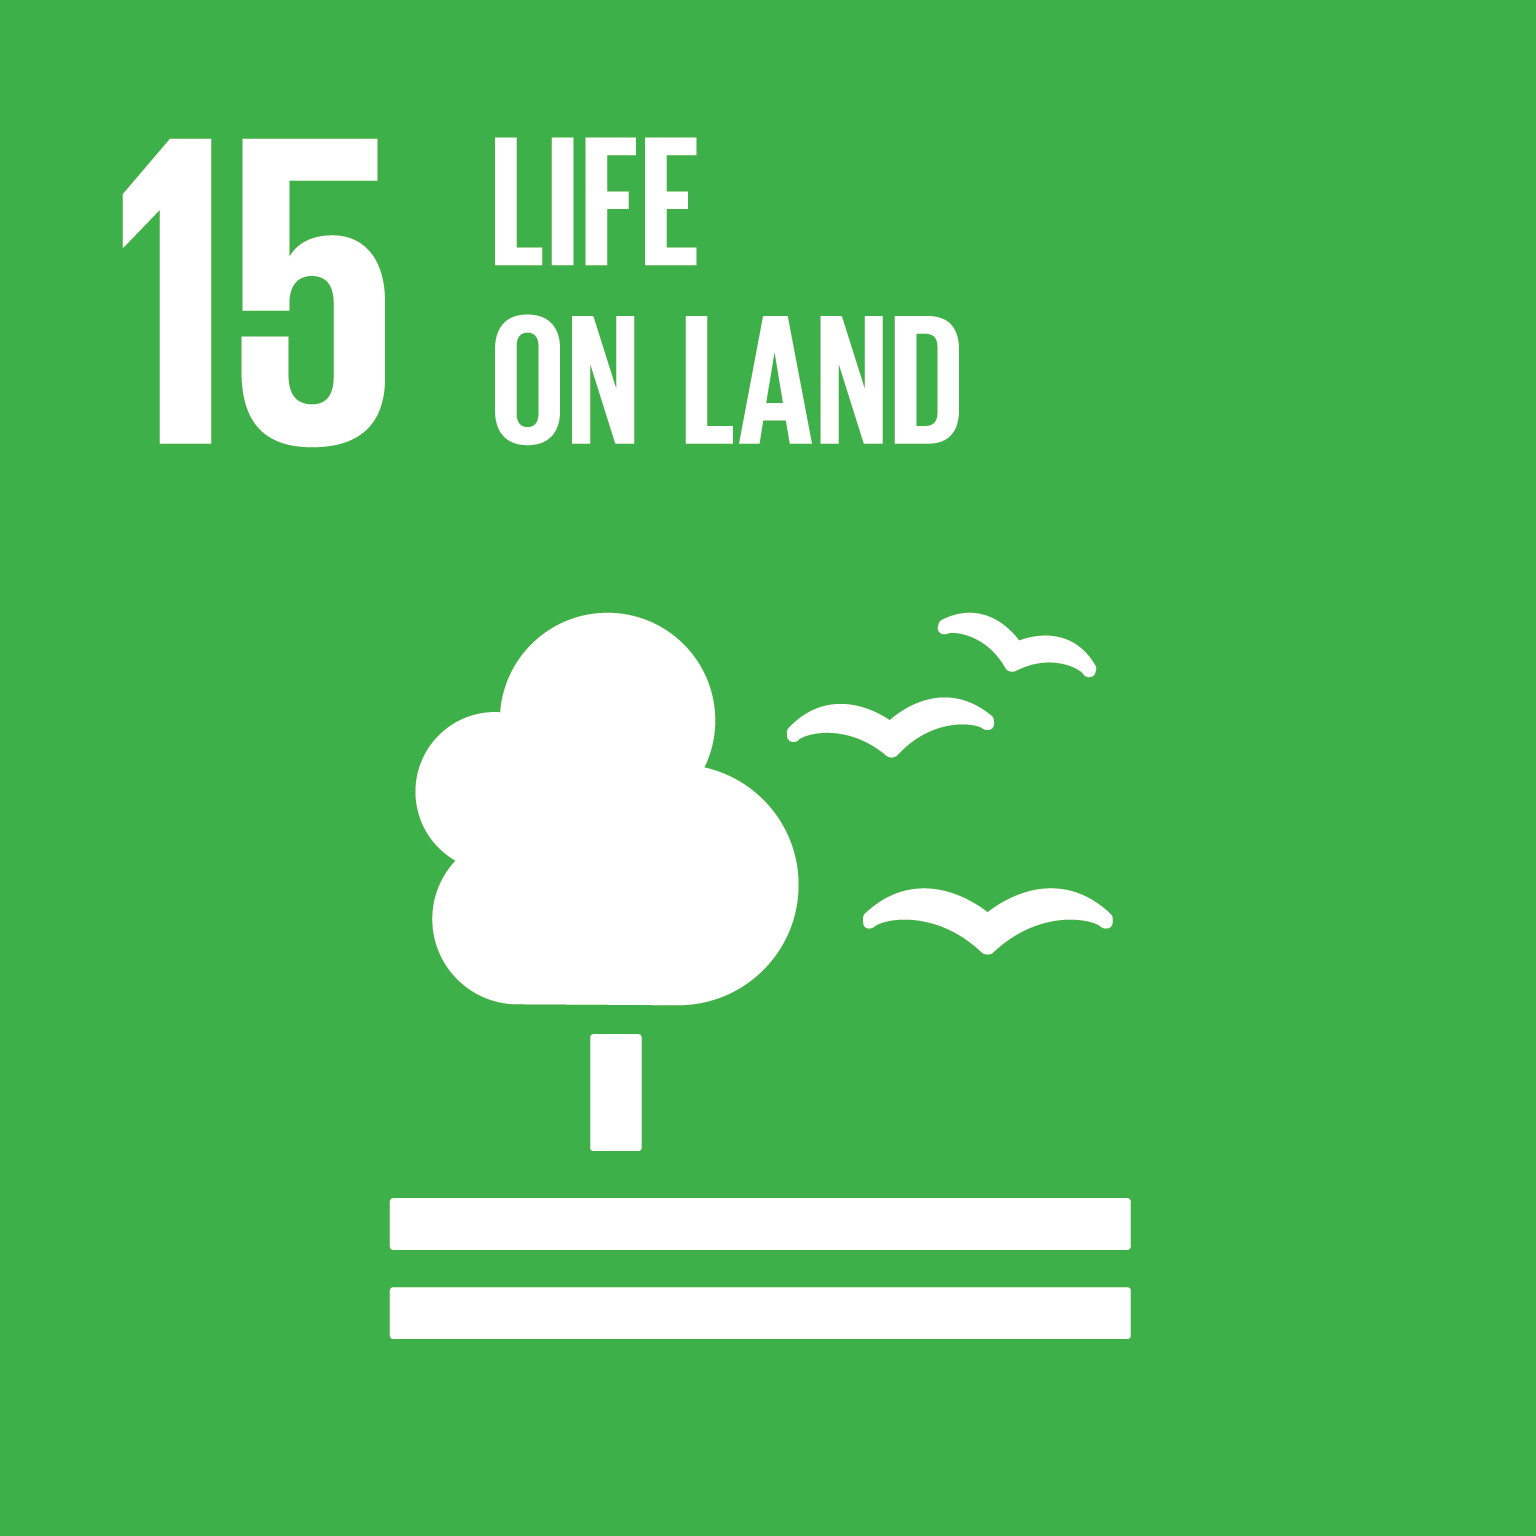 icon for Goal 15 - Protect, restore and promote sustainable use of terrestrial ecosystems, sustainably manage forests, combat desertification, and halt and reverse land degradation and halt biodiversity loss